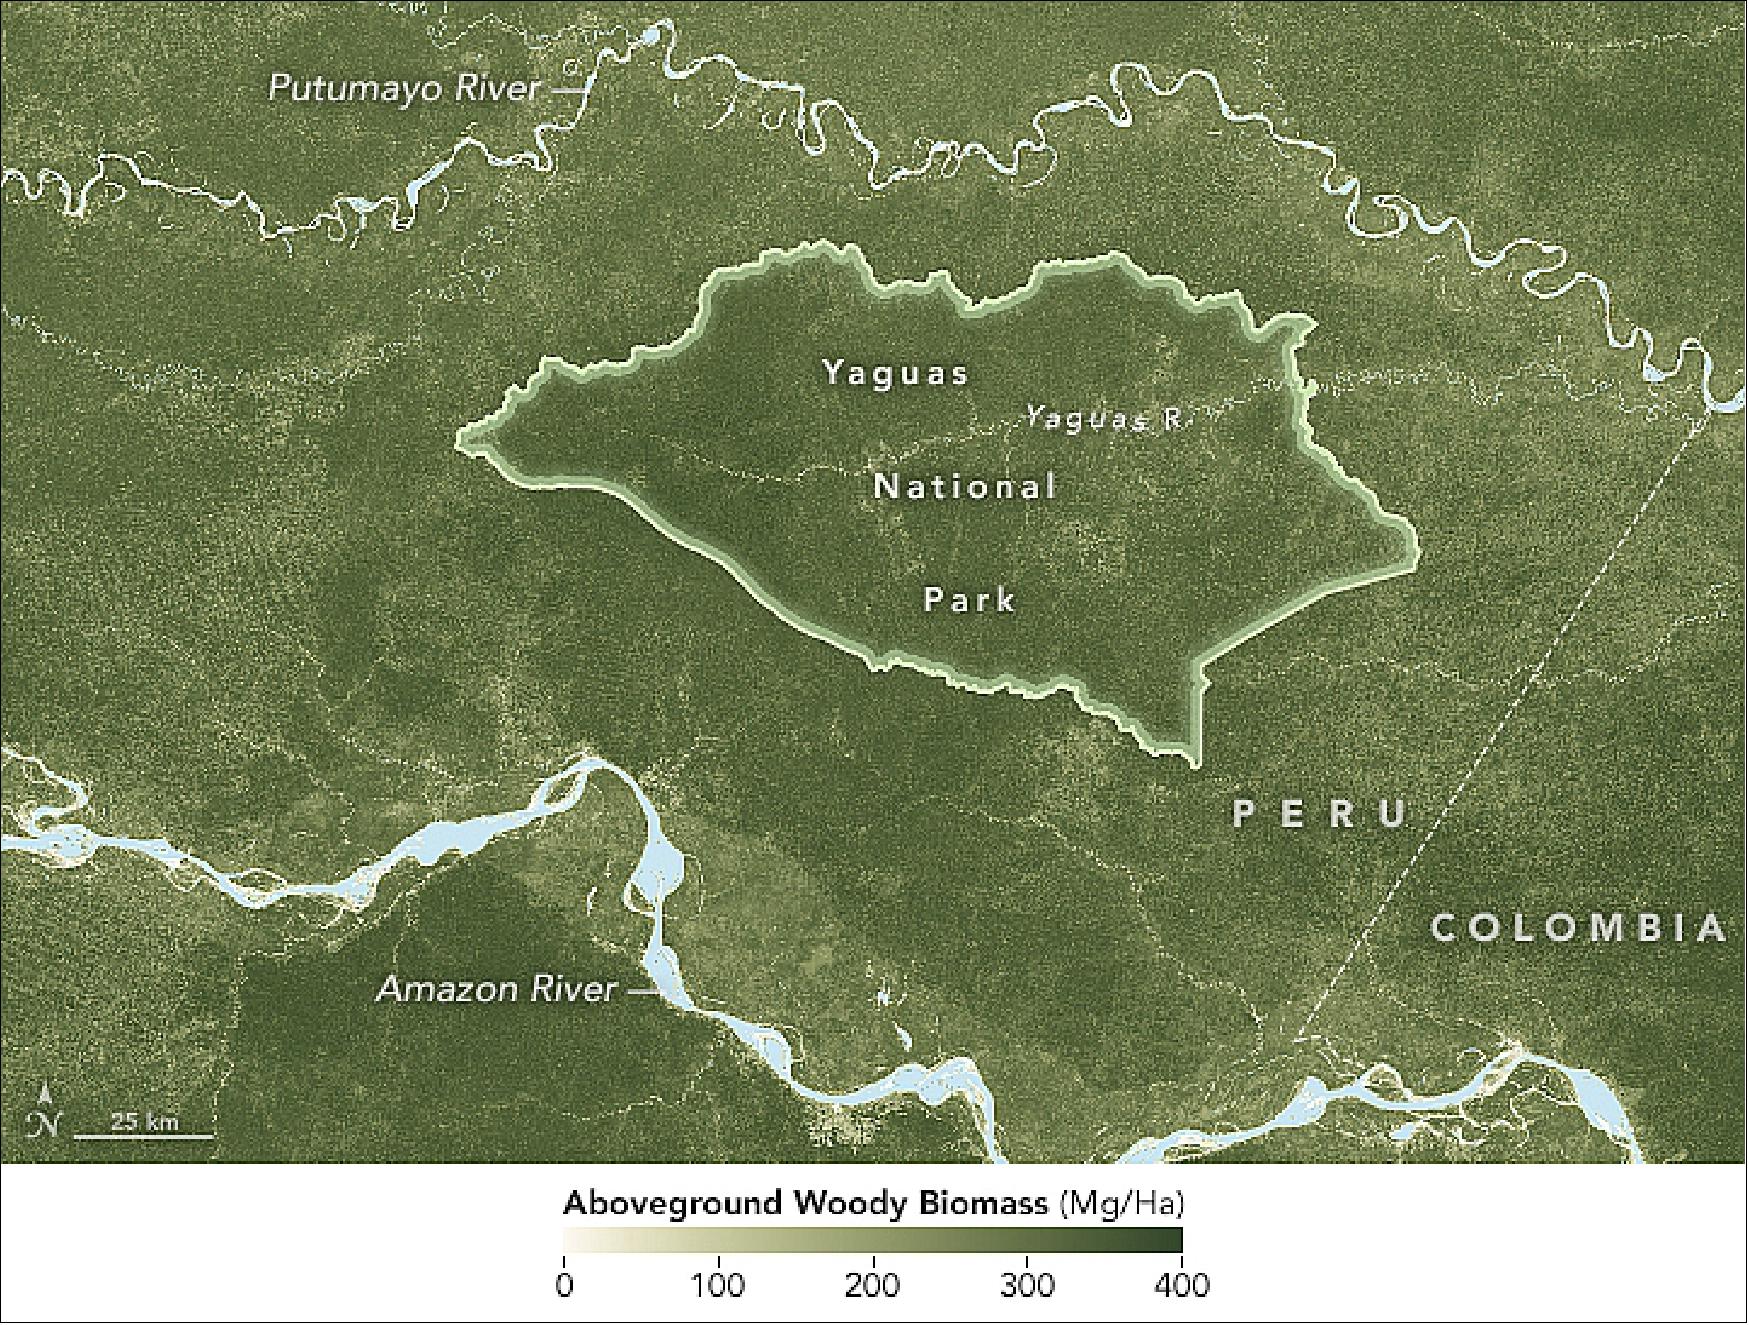 Figure 29: Landsat-7 image acquired in 2000 and inserted model of Yaguas National Park boundaries (image credit: NASA Earth Observatory, images by Joshua Stevens, using data from Global Forest Watch, and Landsat data from the USGS (U.S. Geological Survey), story by Kathryn Hansen)